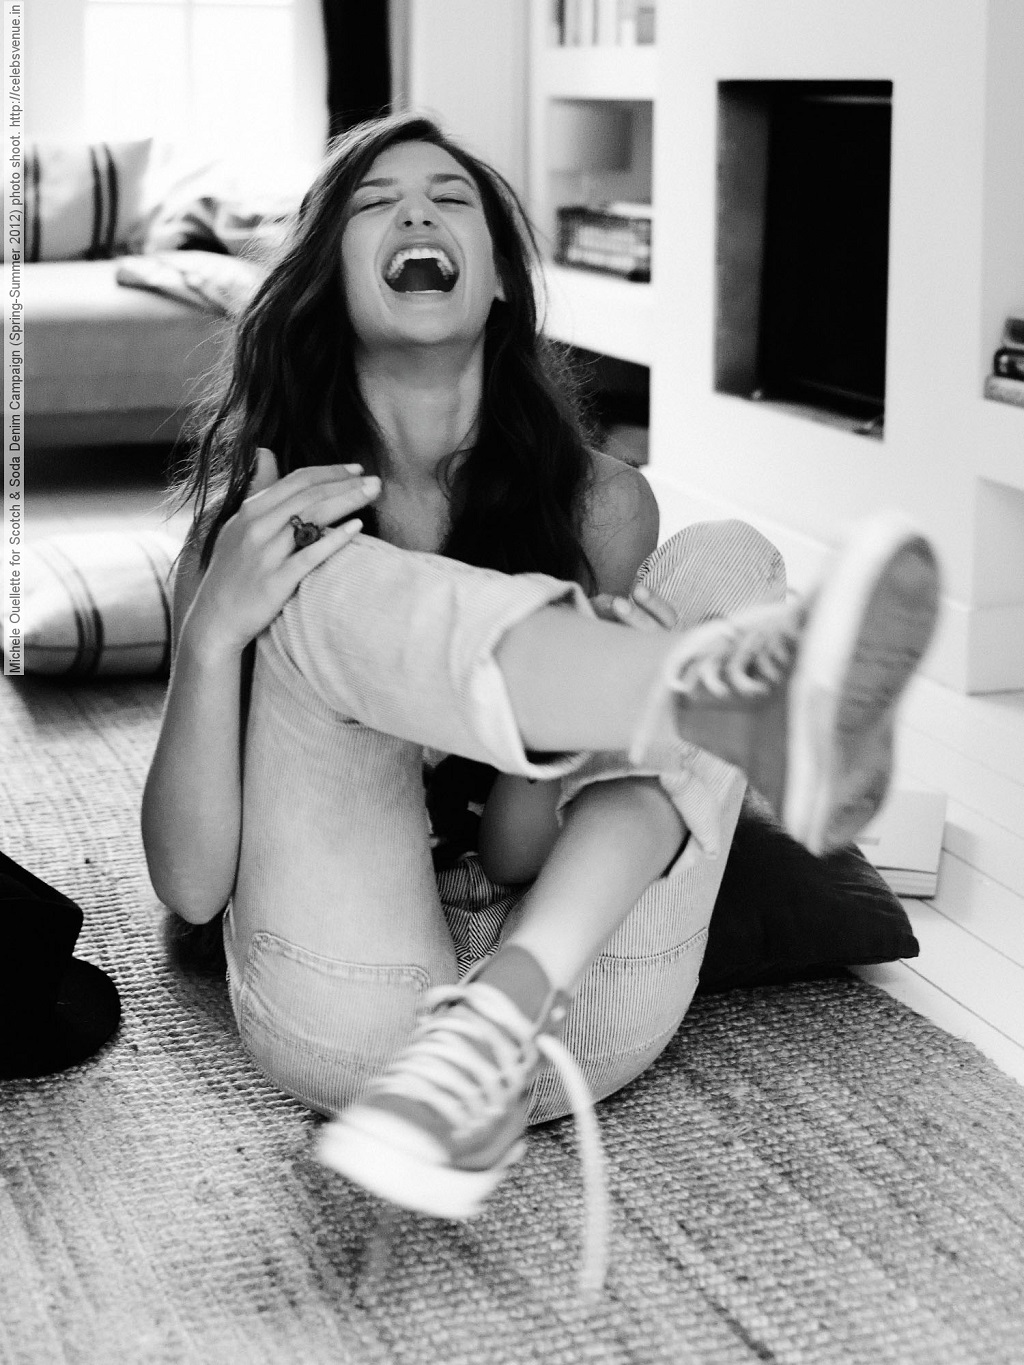 Girl laughs: photo